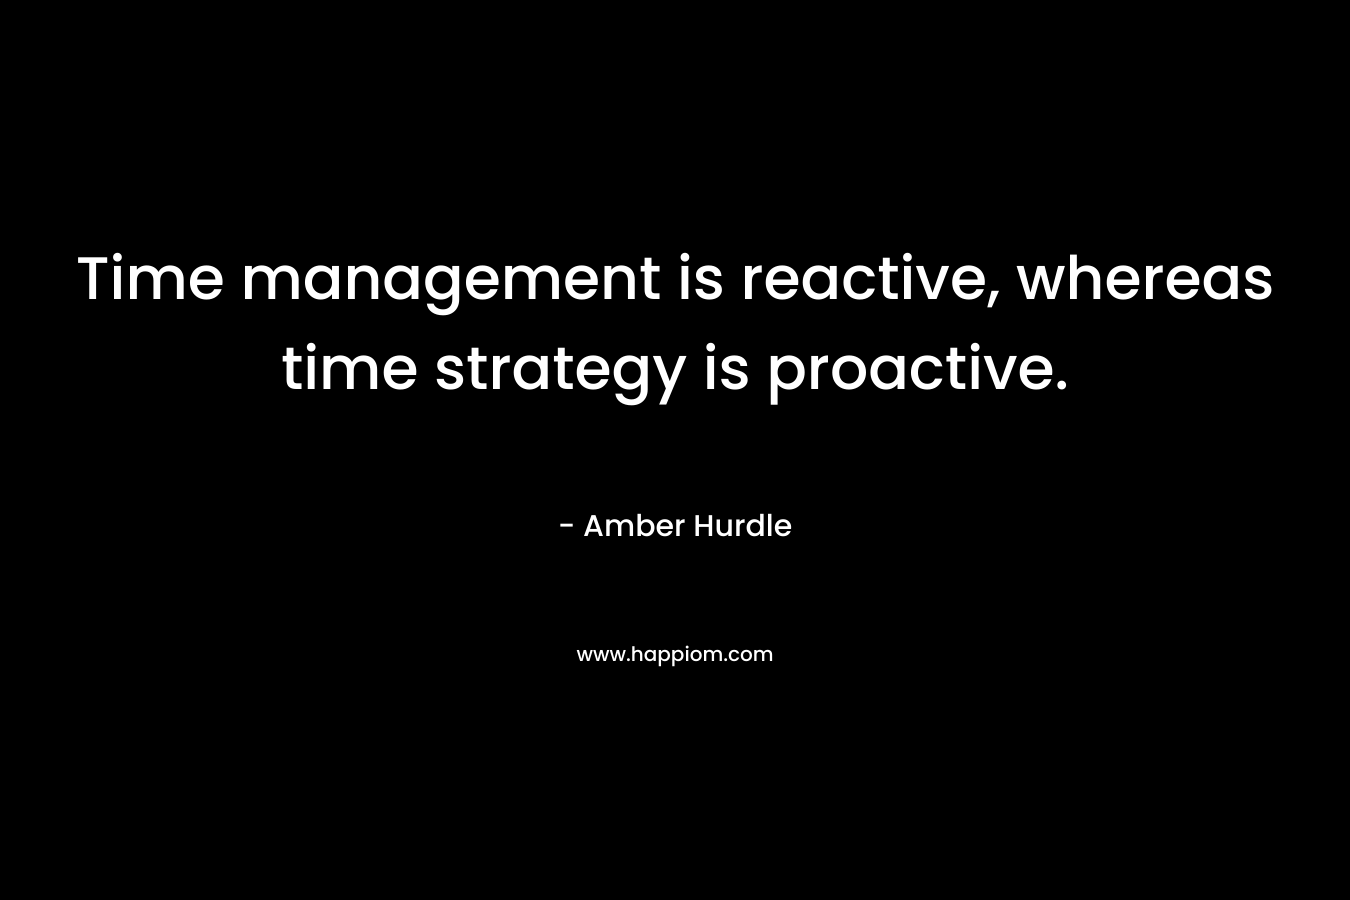 Time management is reactive, whereas time strategy is proactive. – Amber Hurdle